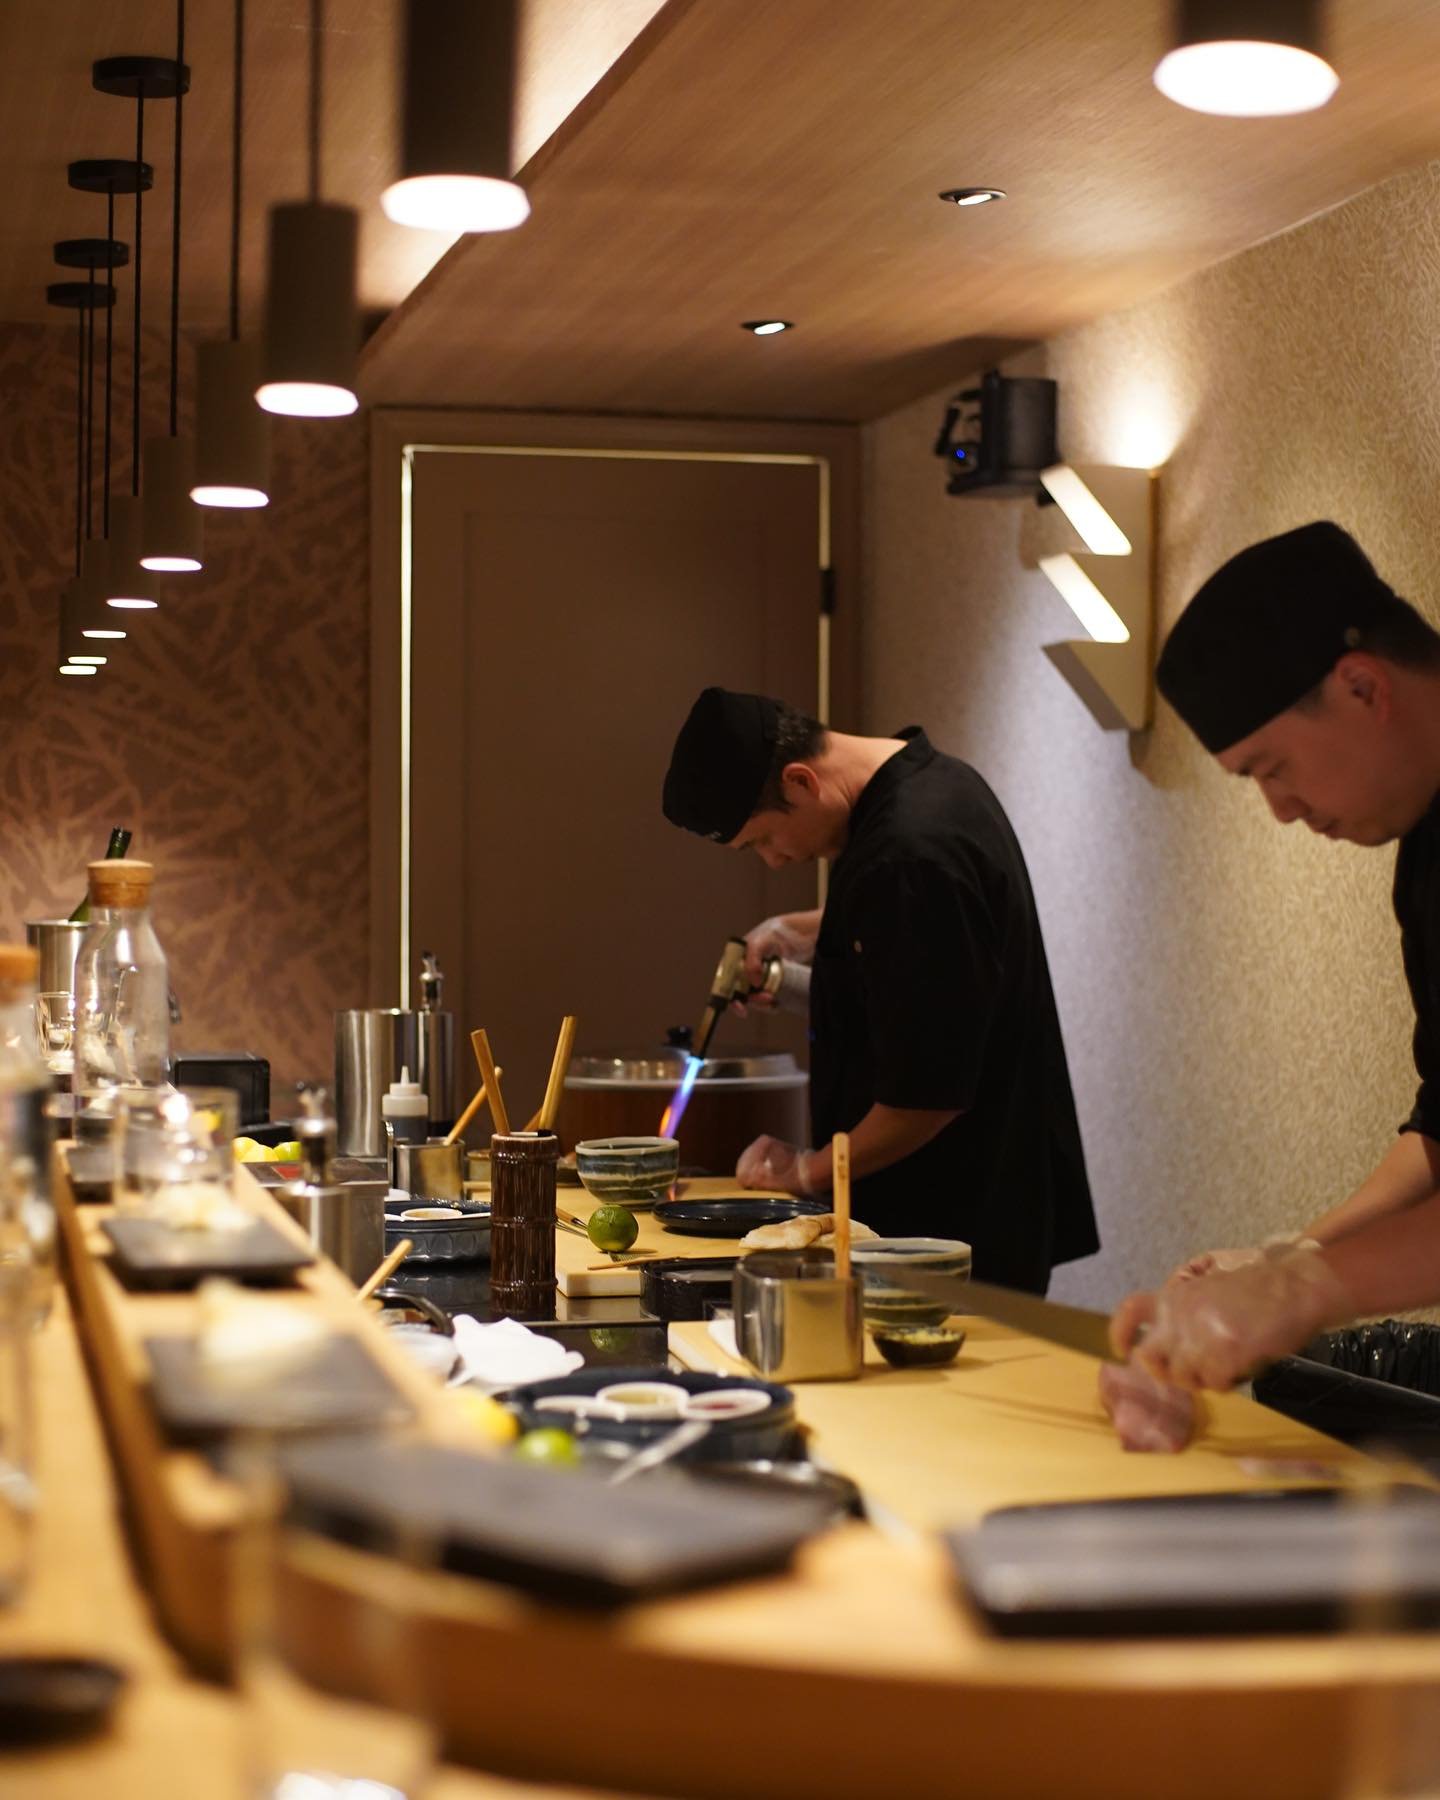 Omakase at Akimori. A seasonal tasting menu combining talented chefs and the highest quality ingredients.